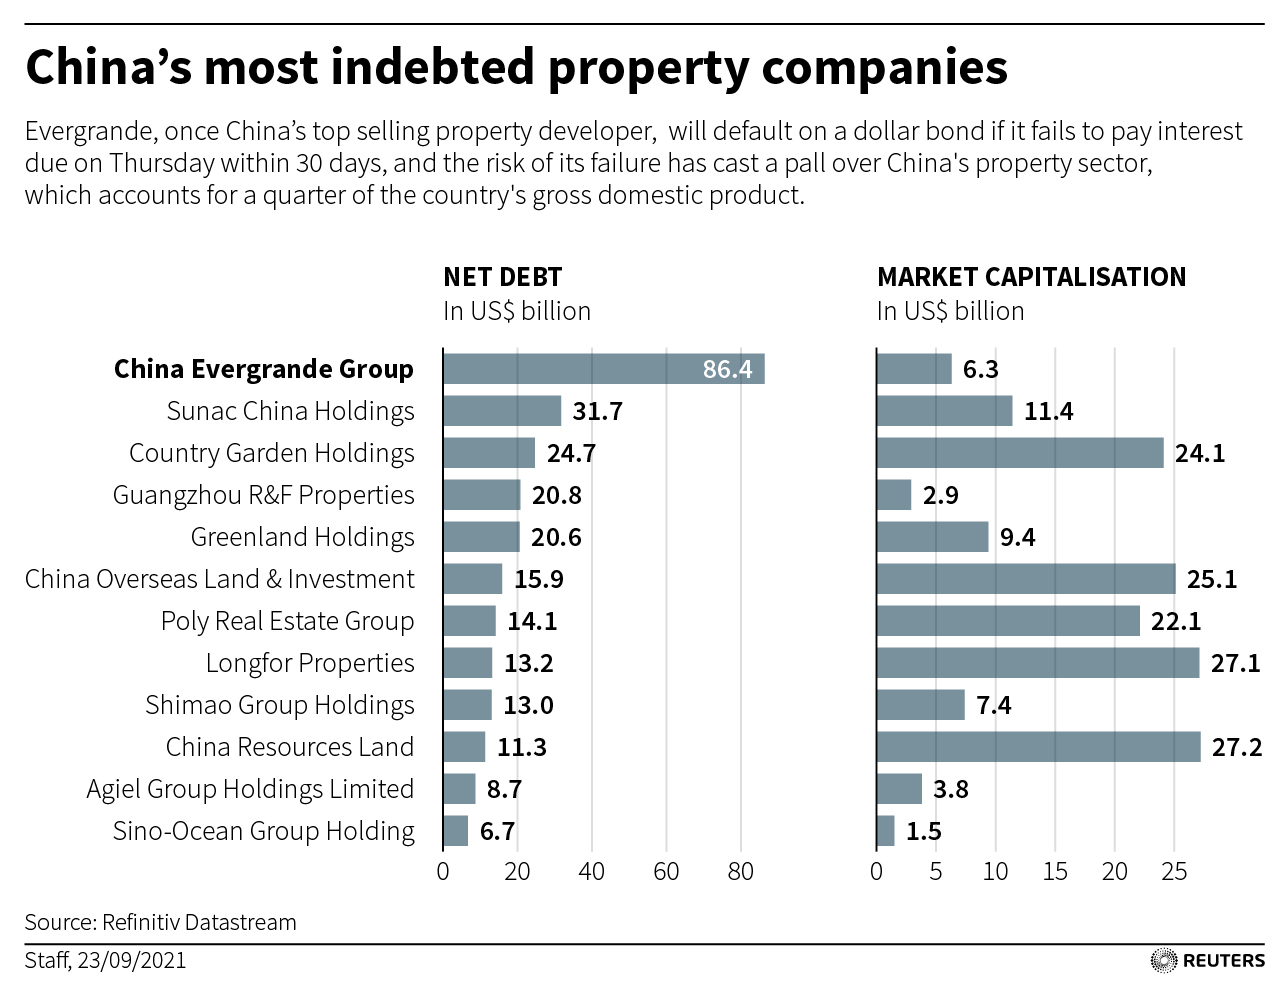 Charts showing net debt and market capitalisation of China's most indebted property companies